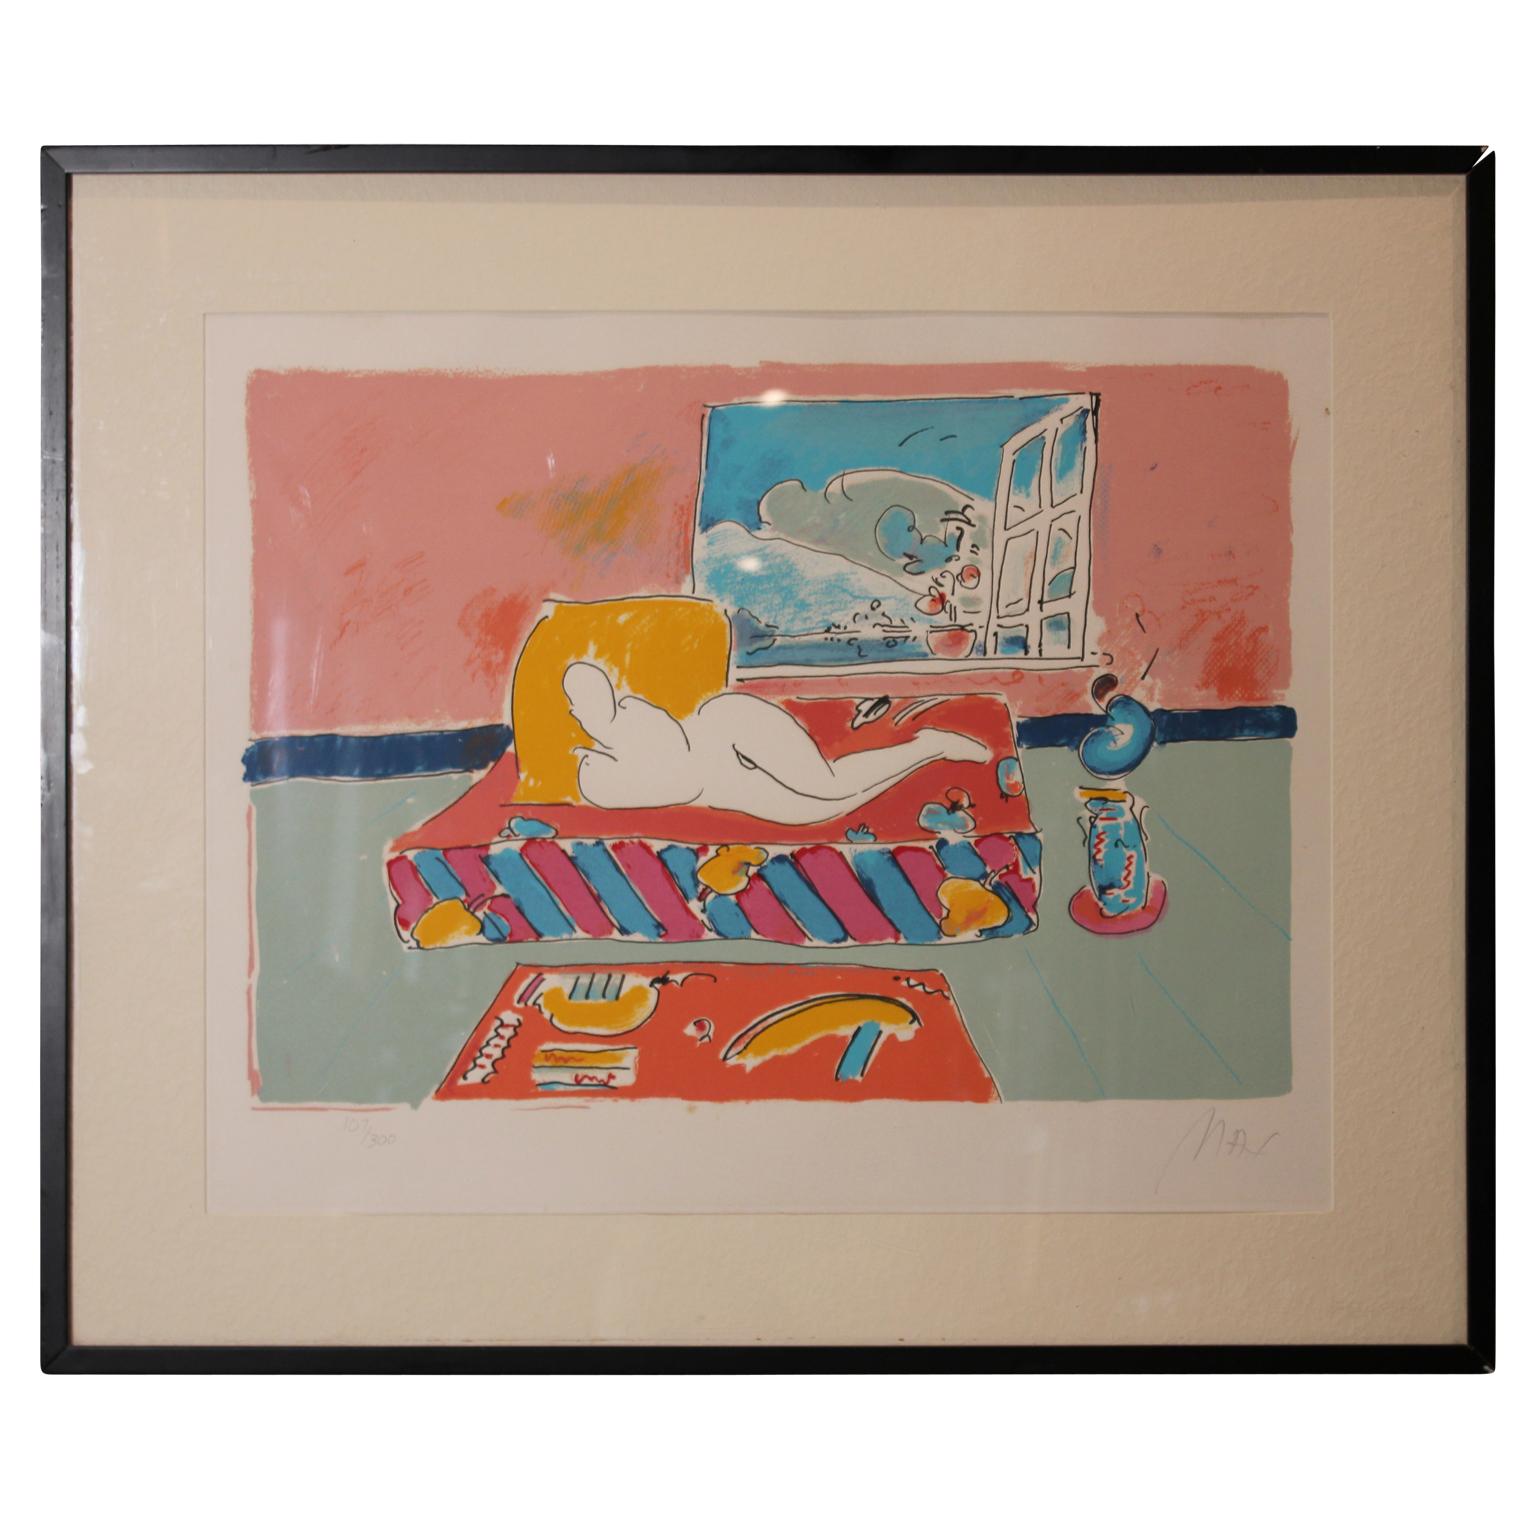 Peter Max Nude Print - Reclining Nude Colorful Lithograph Edition 107 of 300